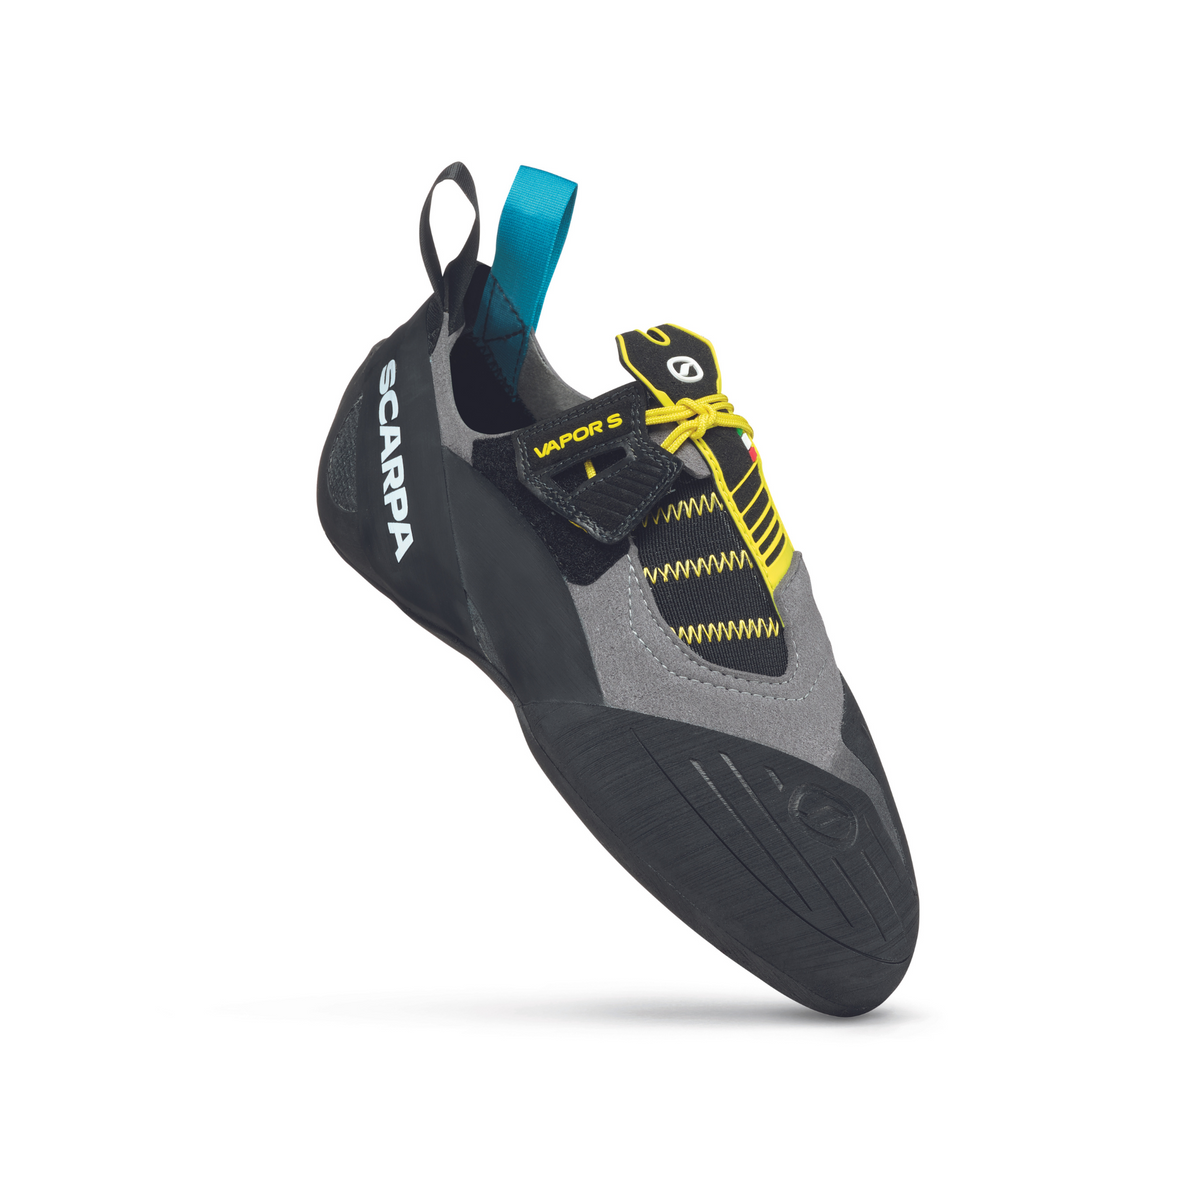 Scarpa Vapour S in smoke-grey with yellow trim. image showing outside sole with removable strap and toe rubber patch